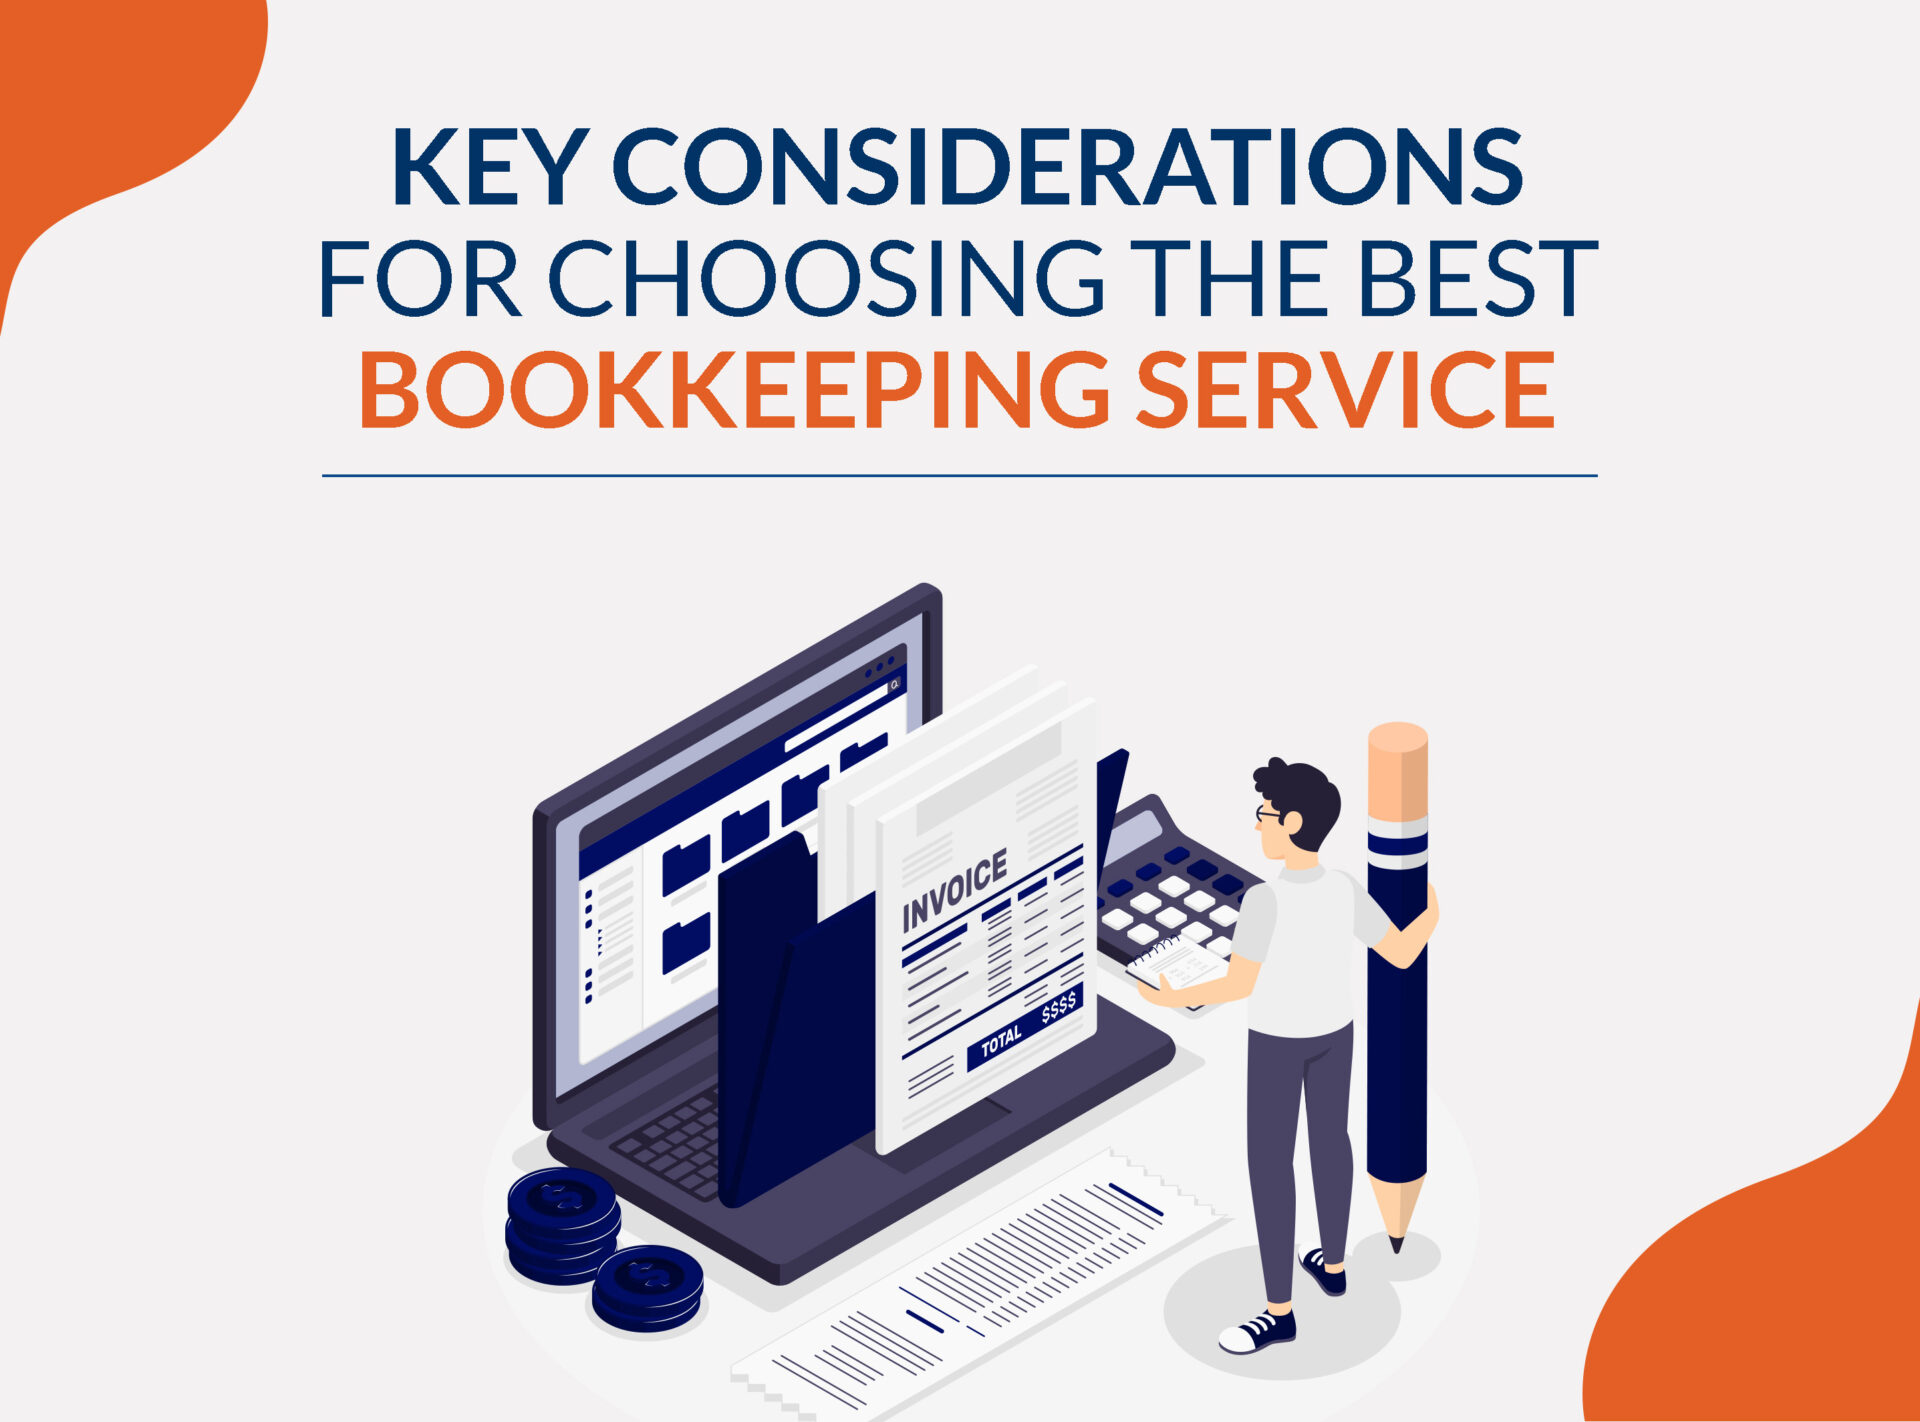 Key Considerations for Choosing the Best Bookkeeping Service